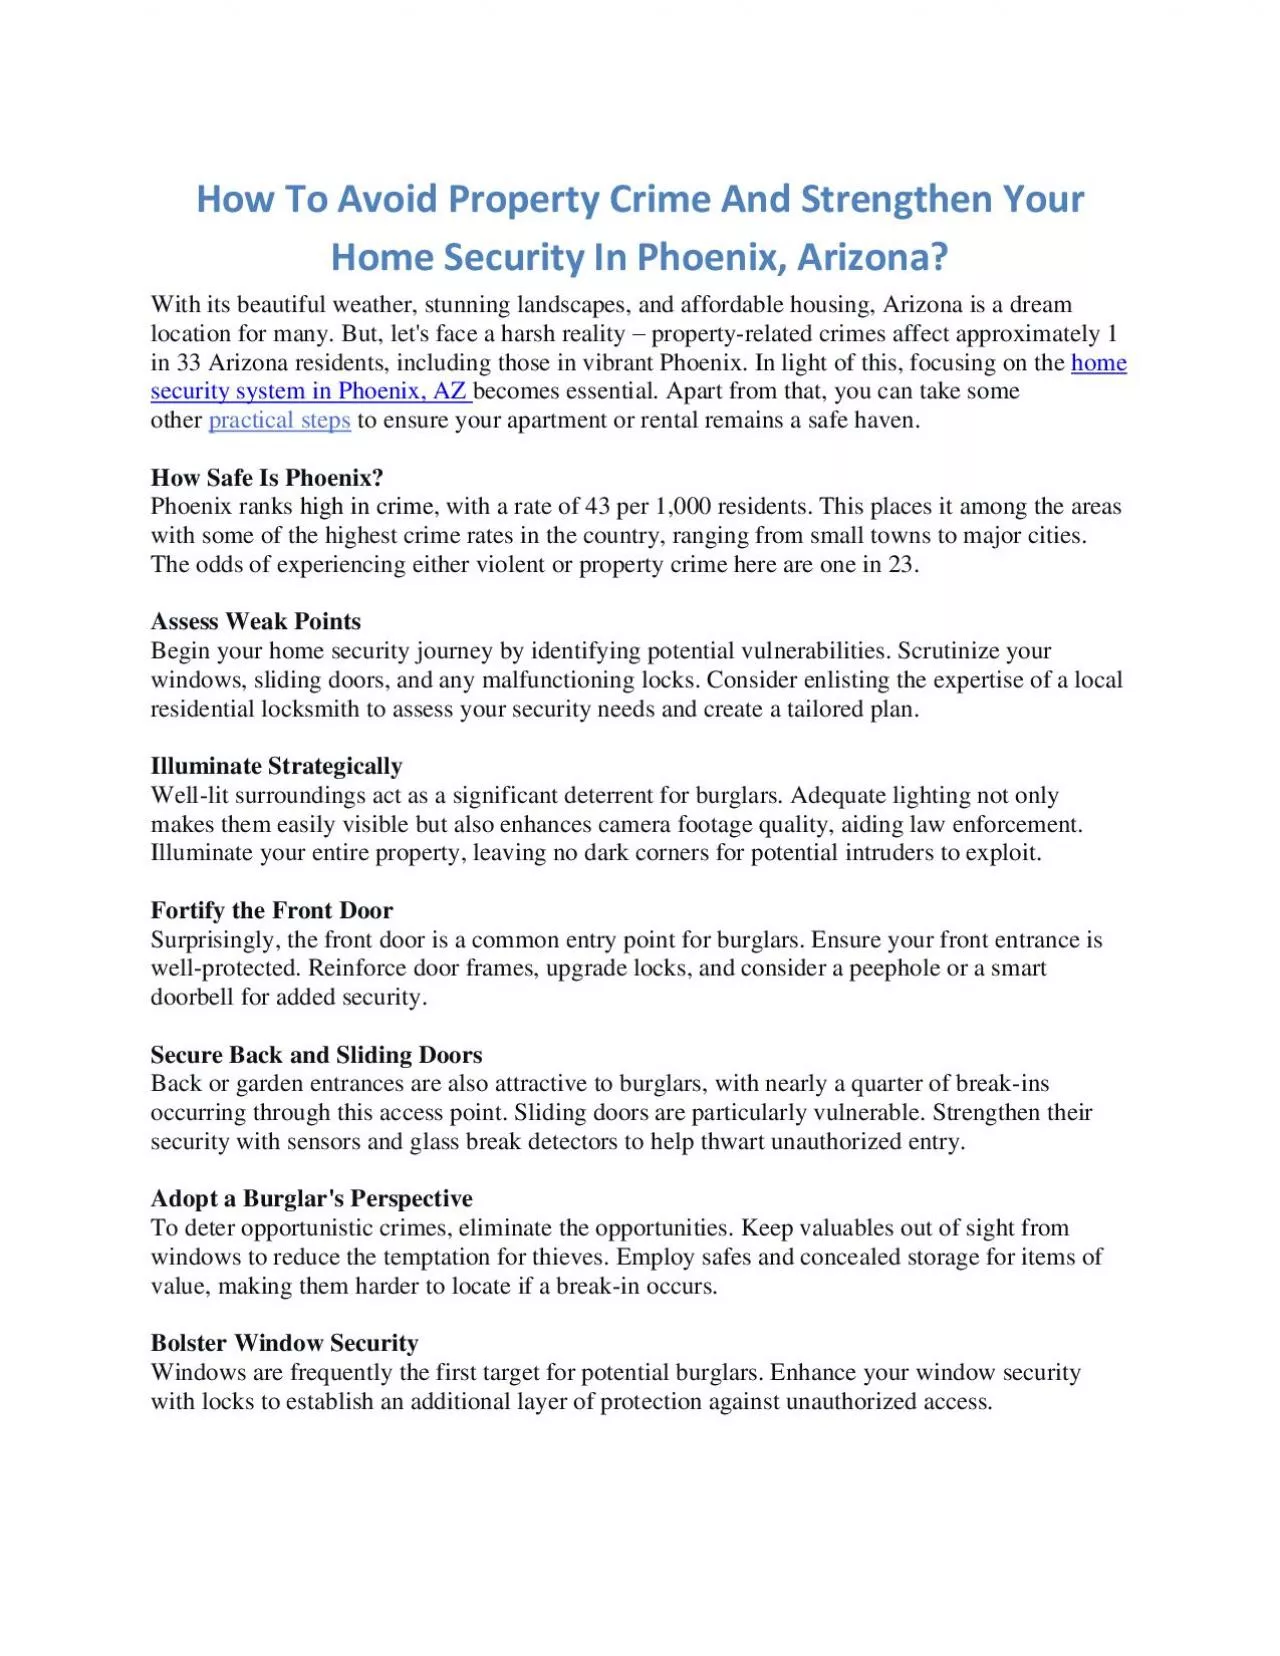 How To Avoid Property Crime And Strengthen Your Home Security In Phoenix, Arizona?